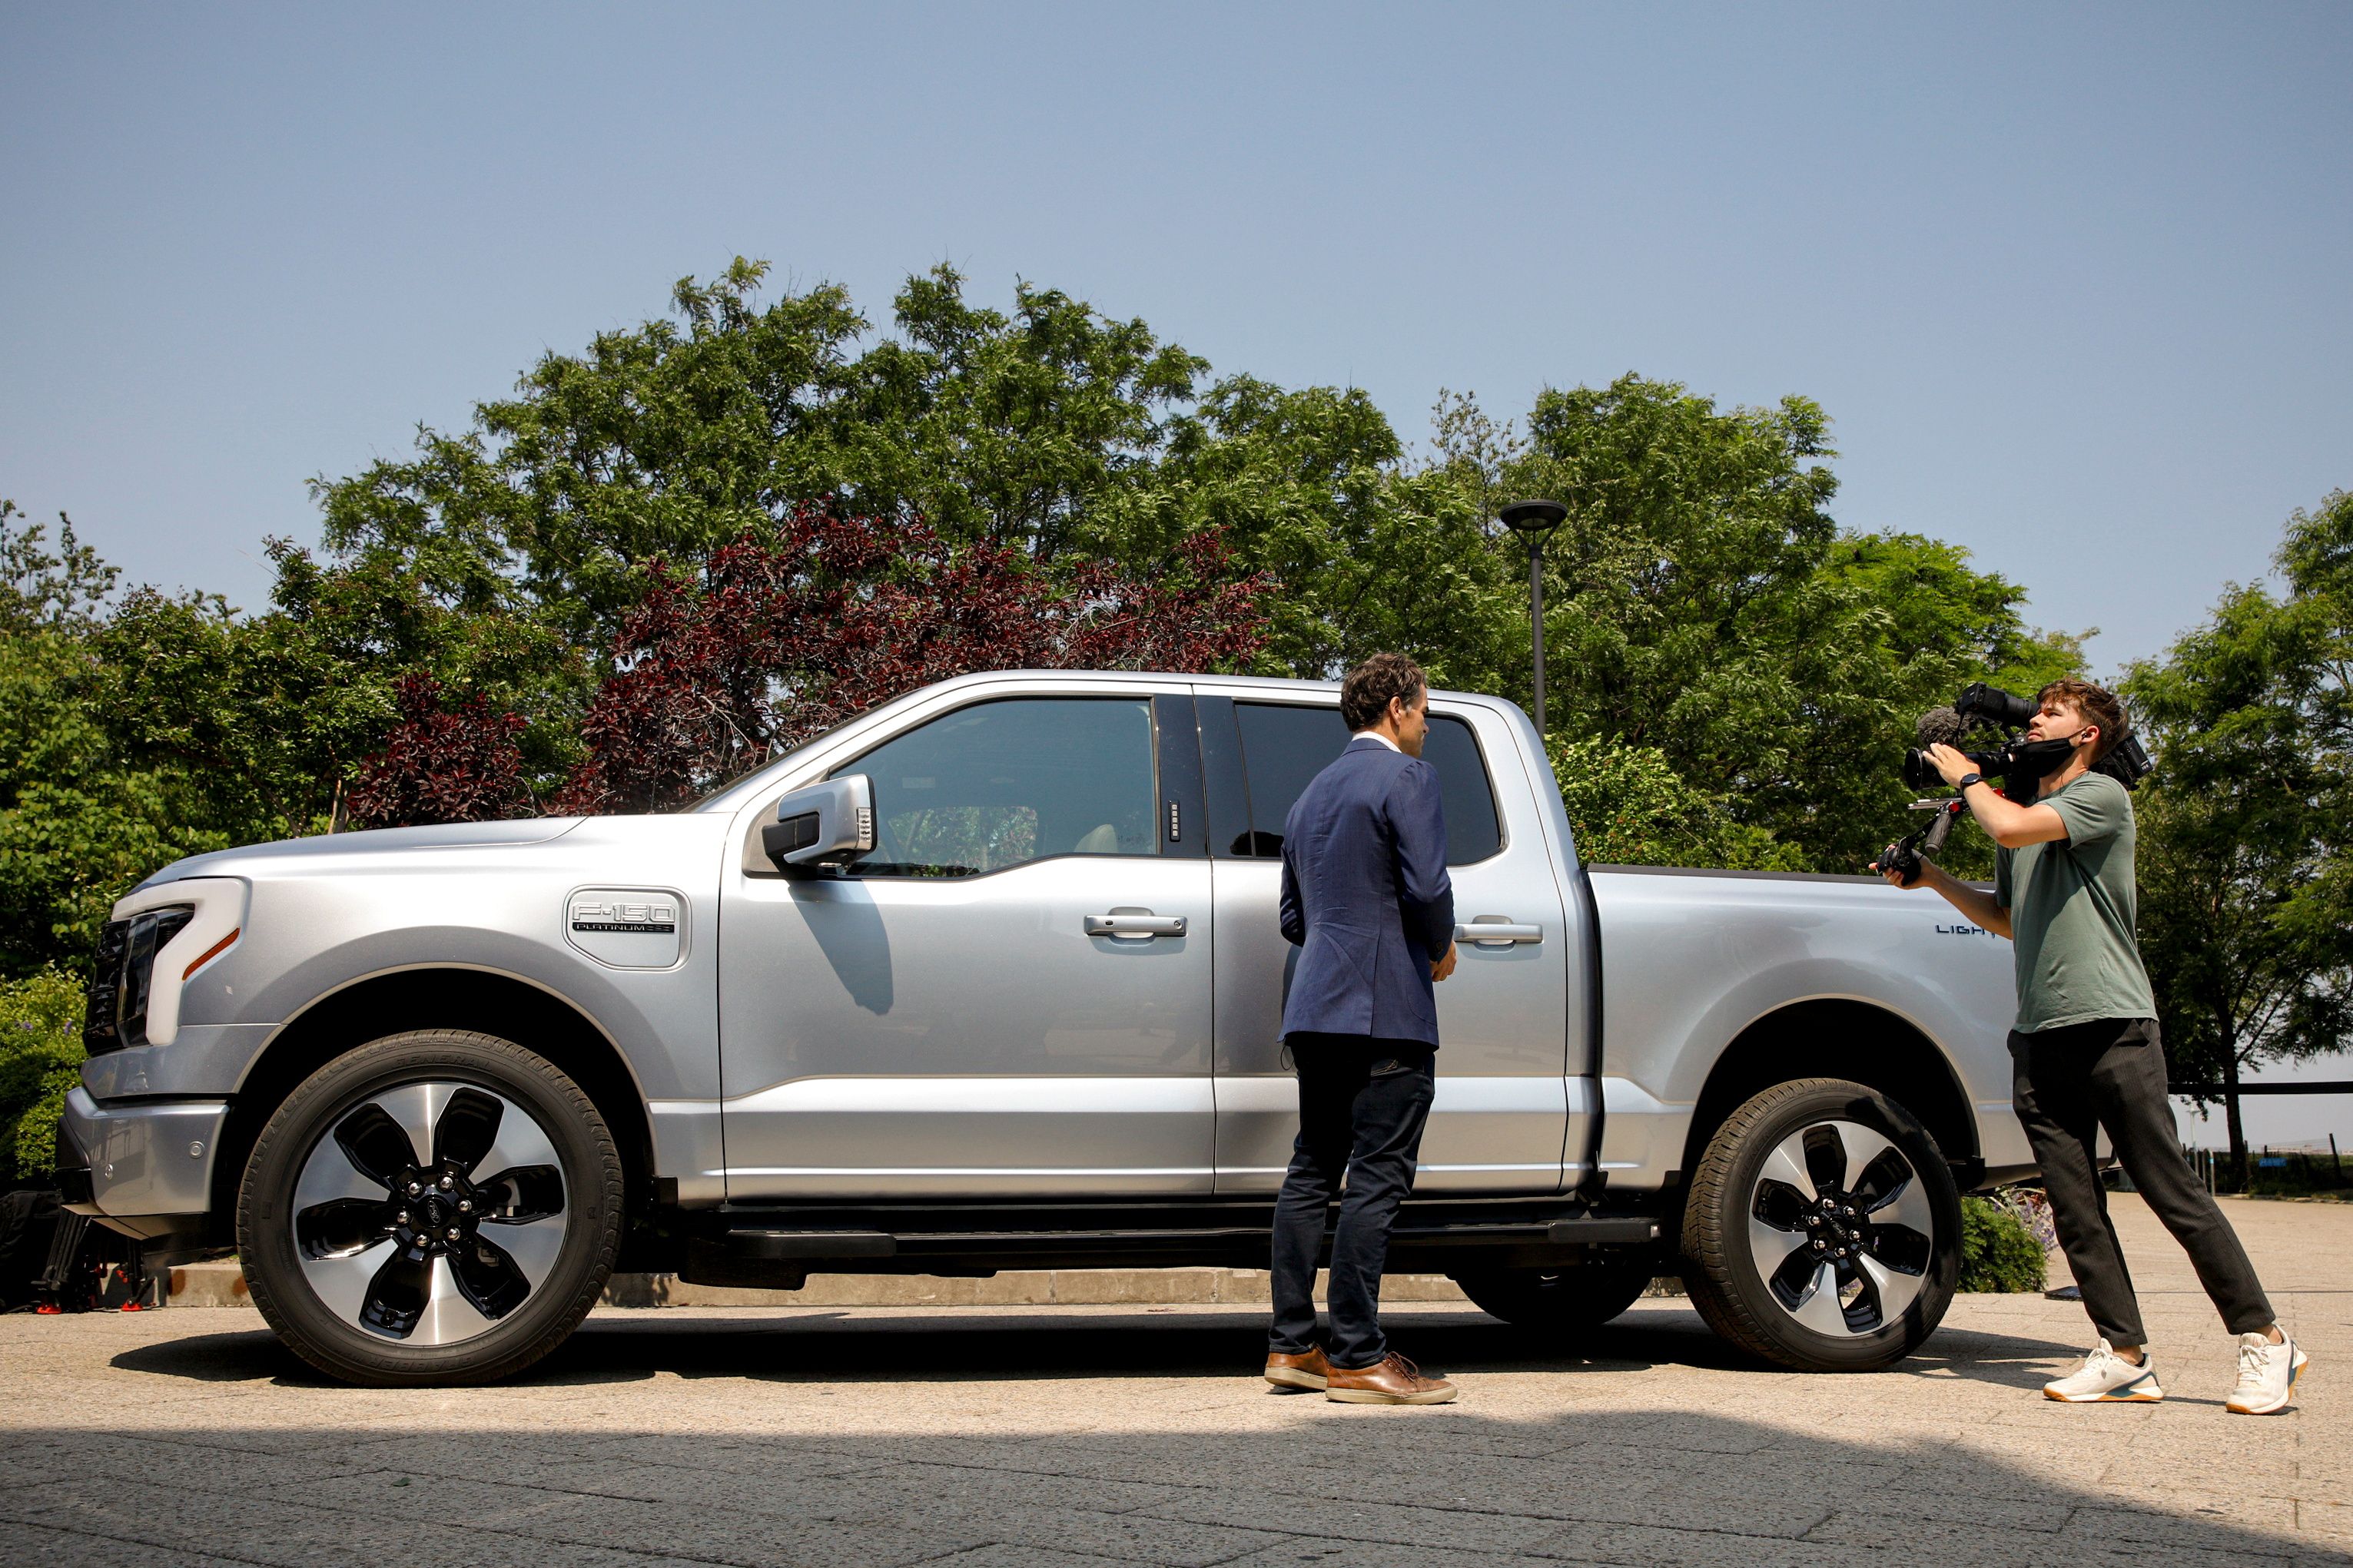 A news crew films the Ford F-150 Lightning pickup truck during a press event in New York